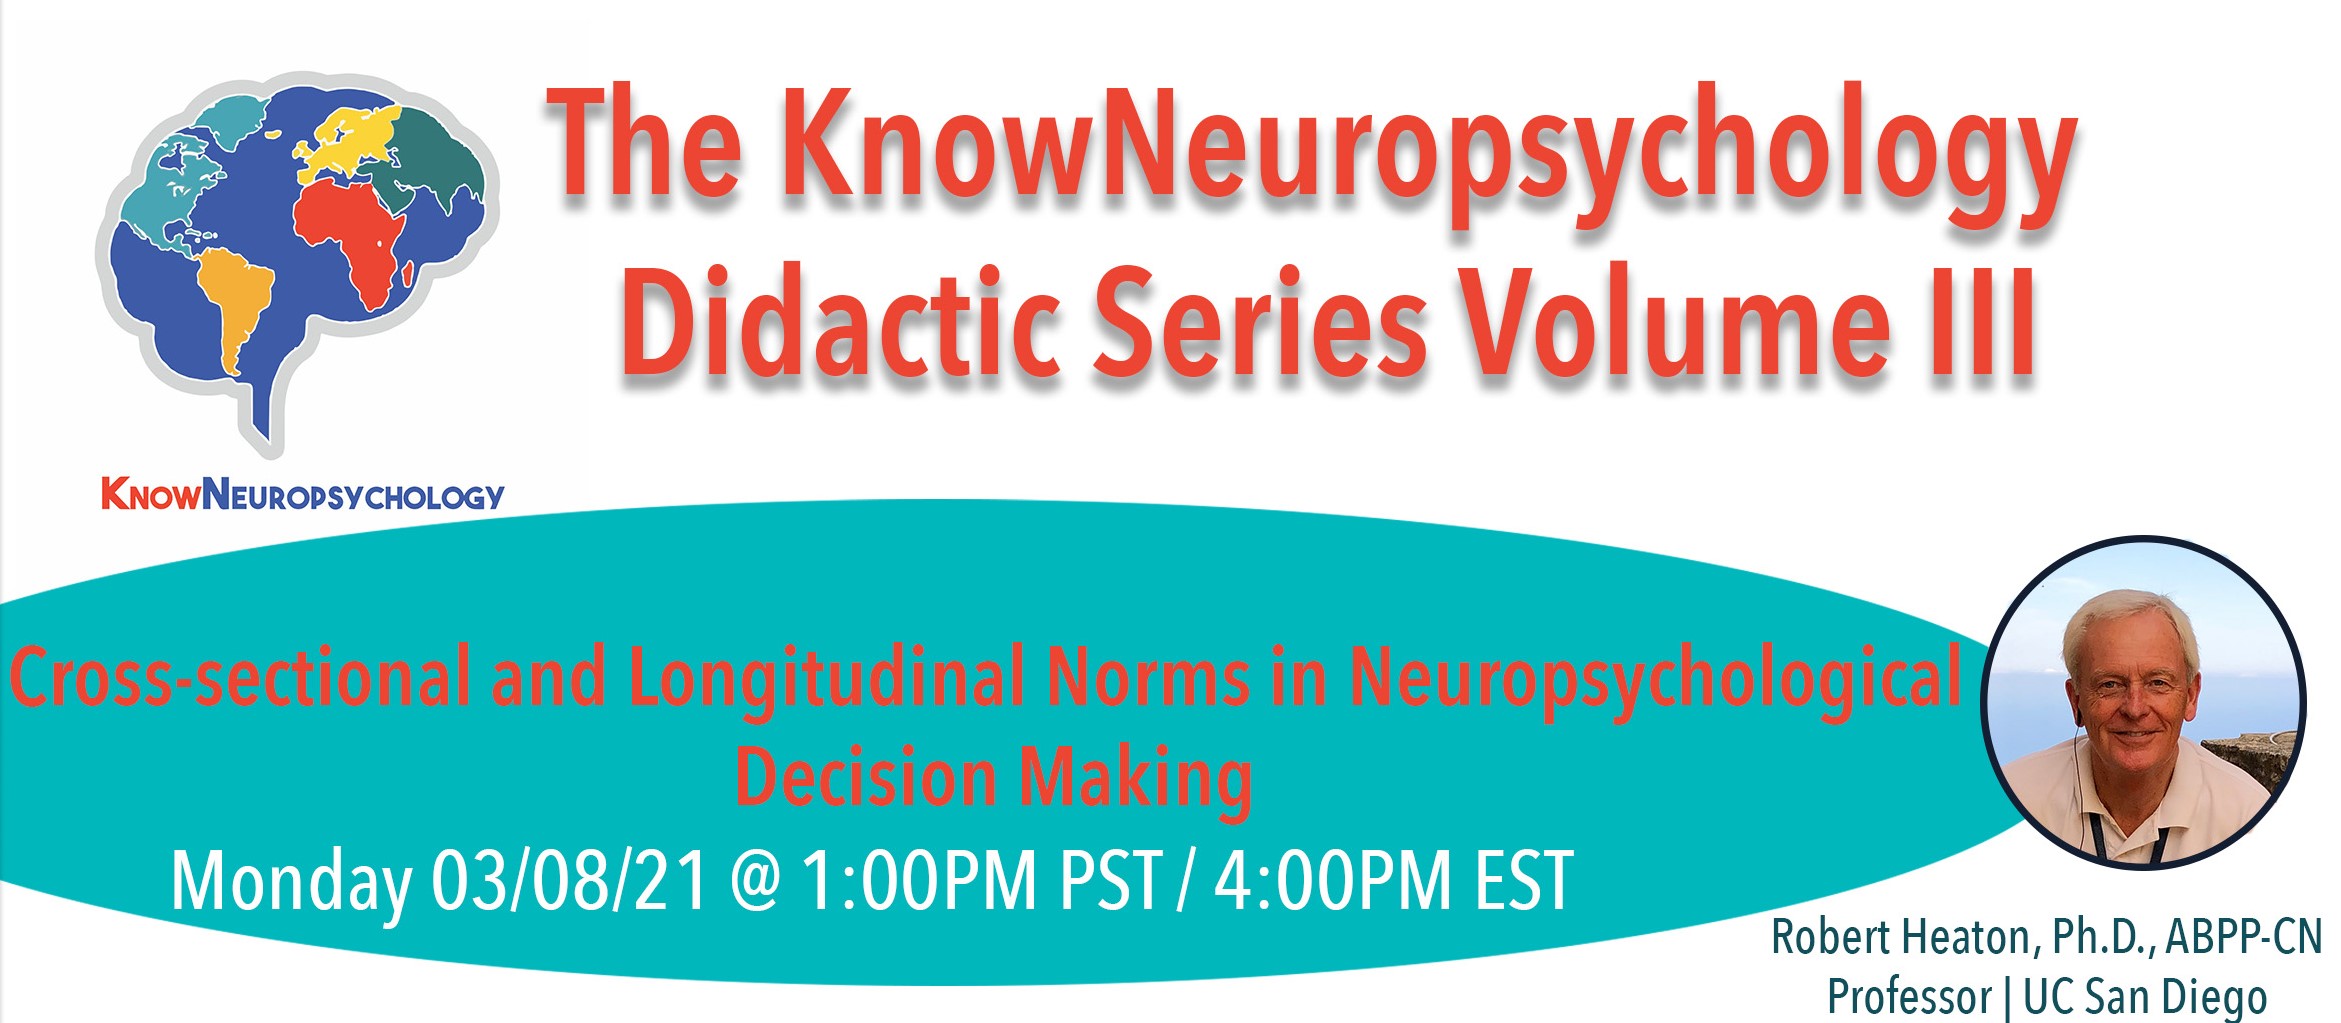 The KnowNeuropsychology Didactic Series Volume III: Cross-sectional and longitudinal norms in neuropsychological decision making with Dr. Robert Heaton